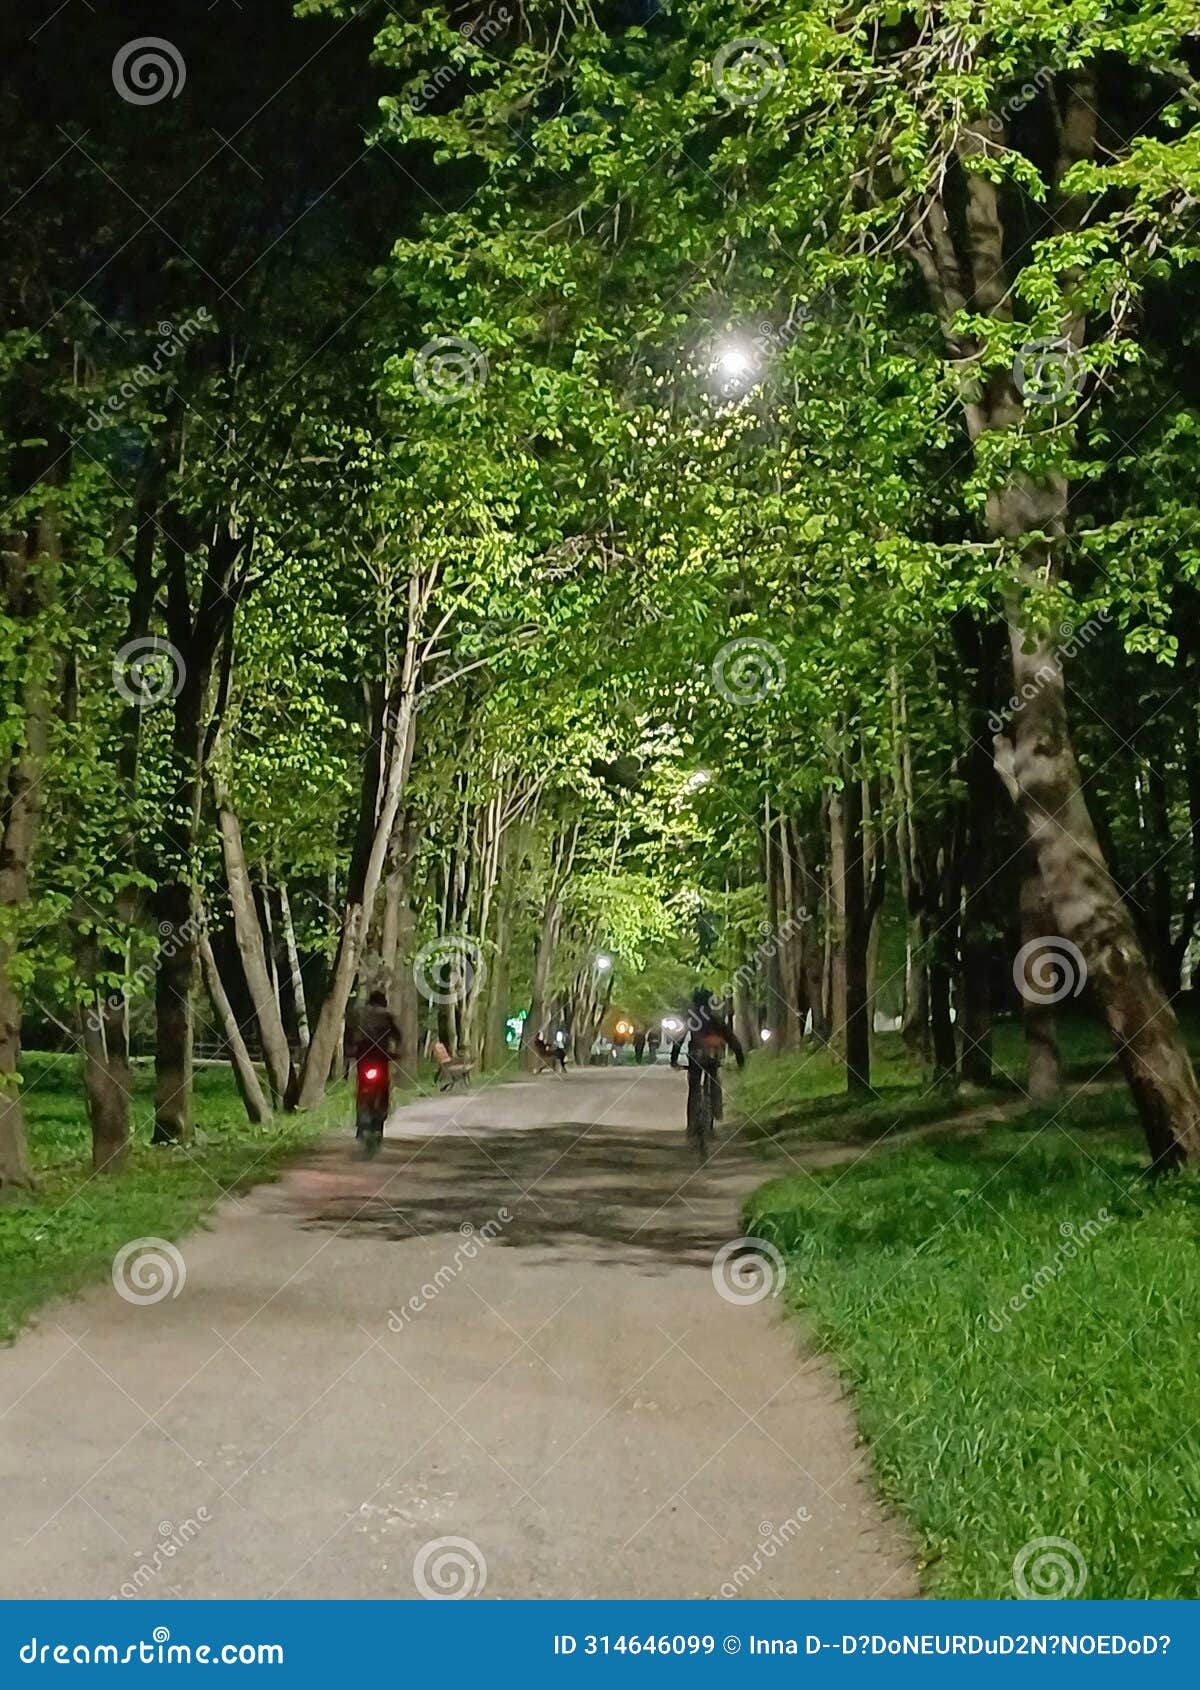 a path in a park with trees